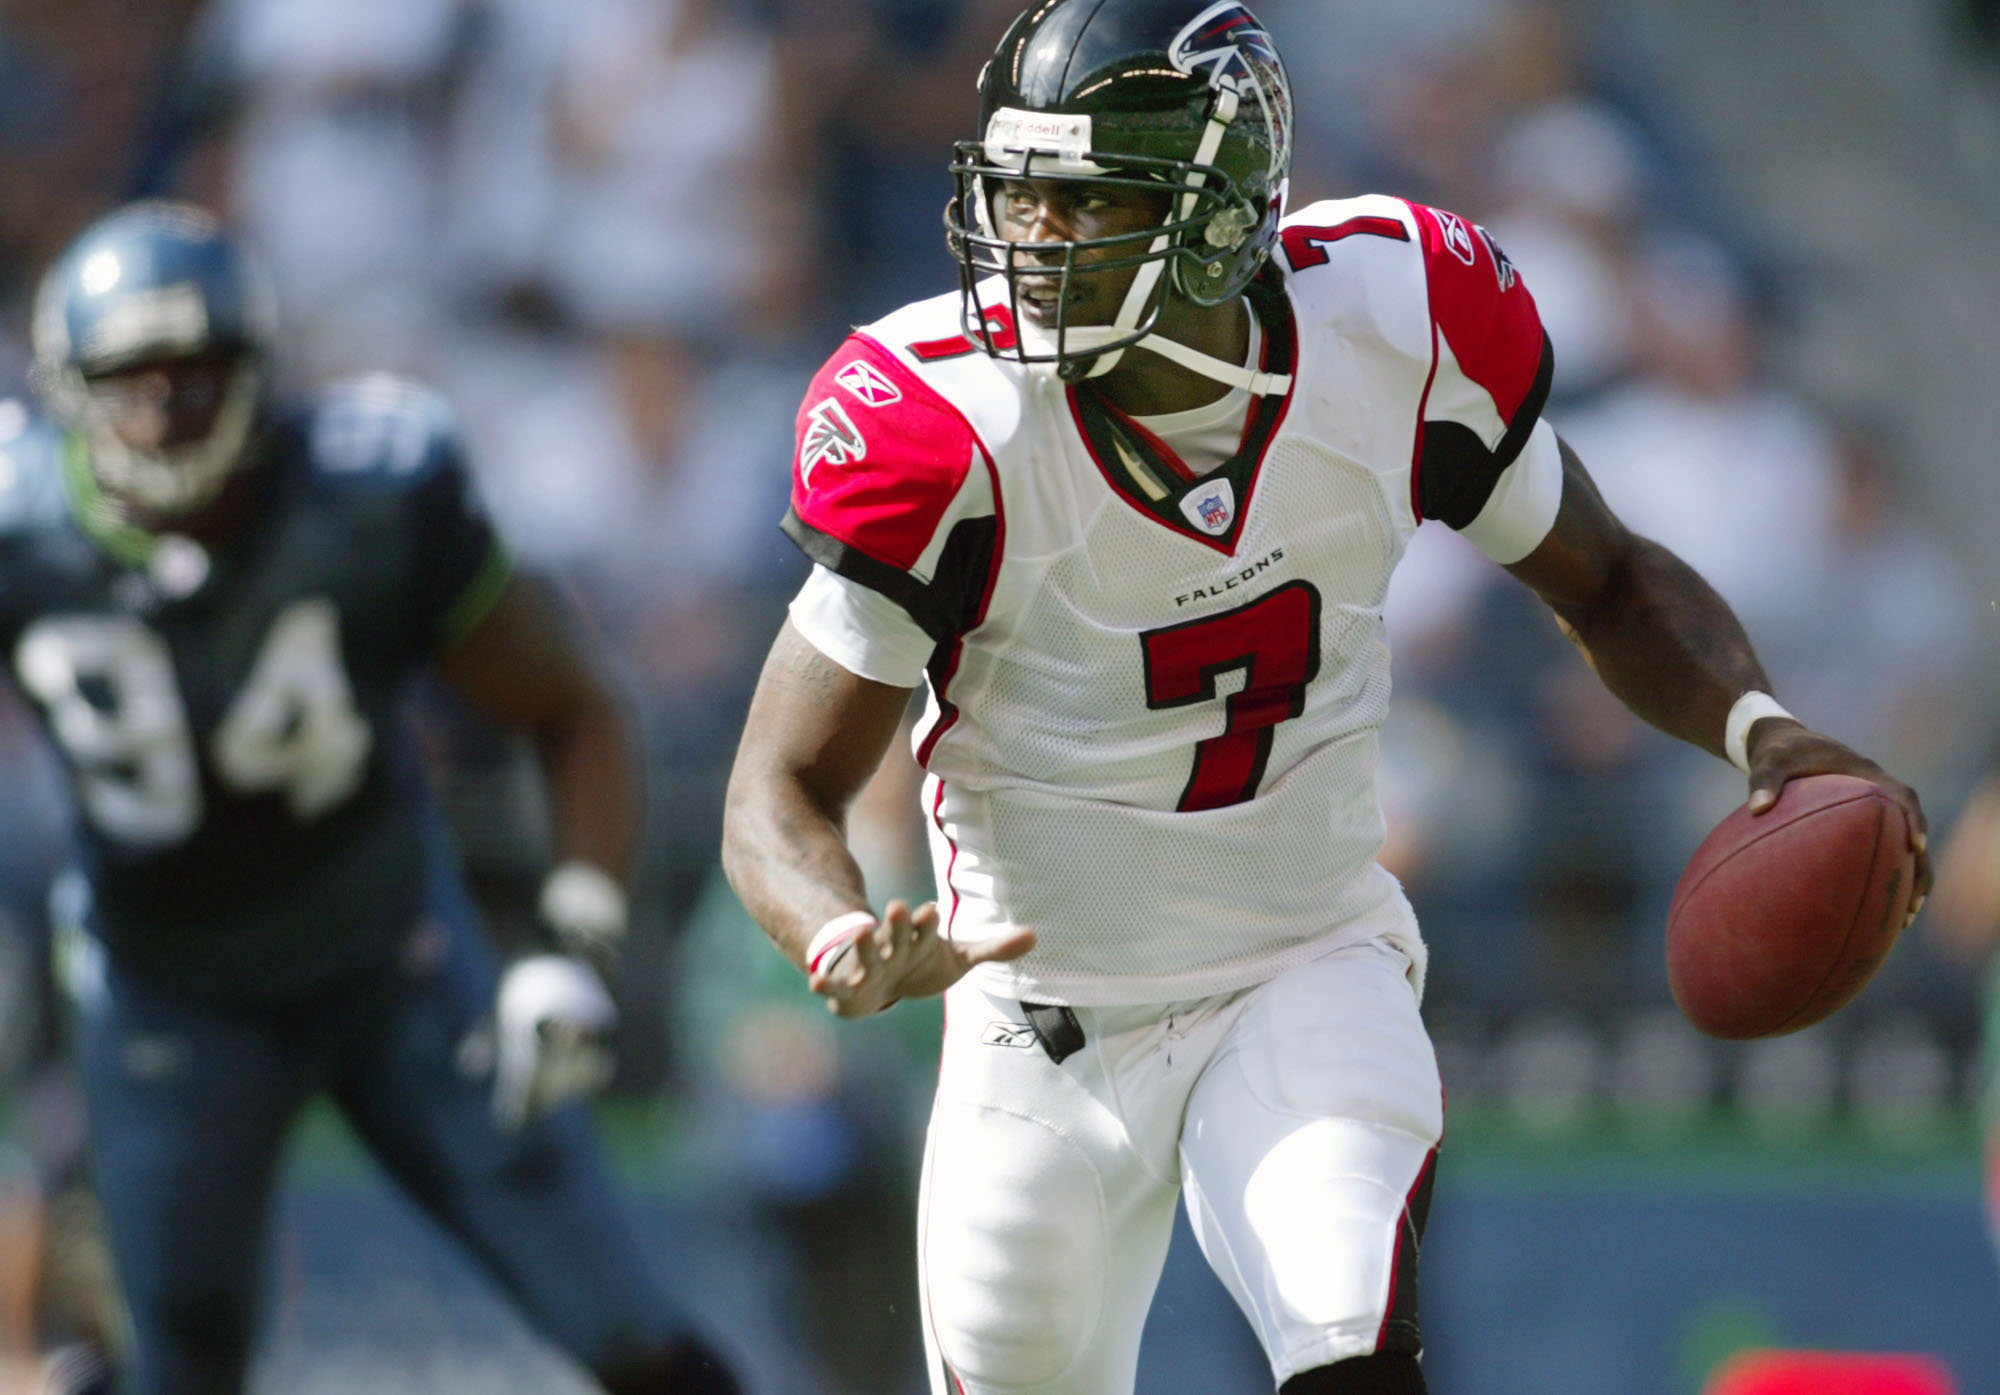 Michael Vick to play in American Flag Football League trial game